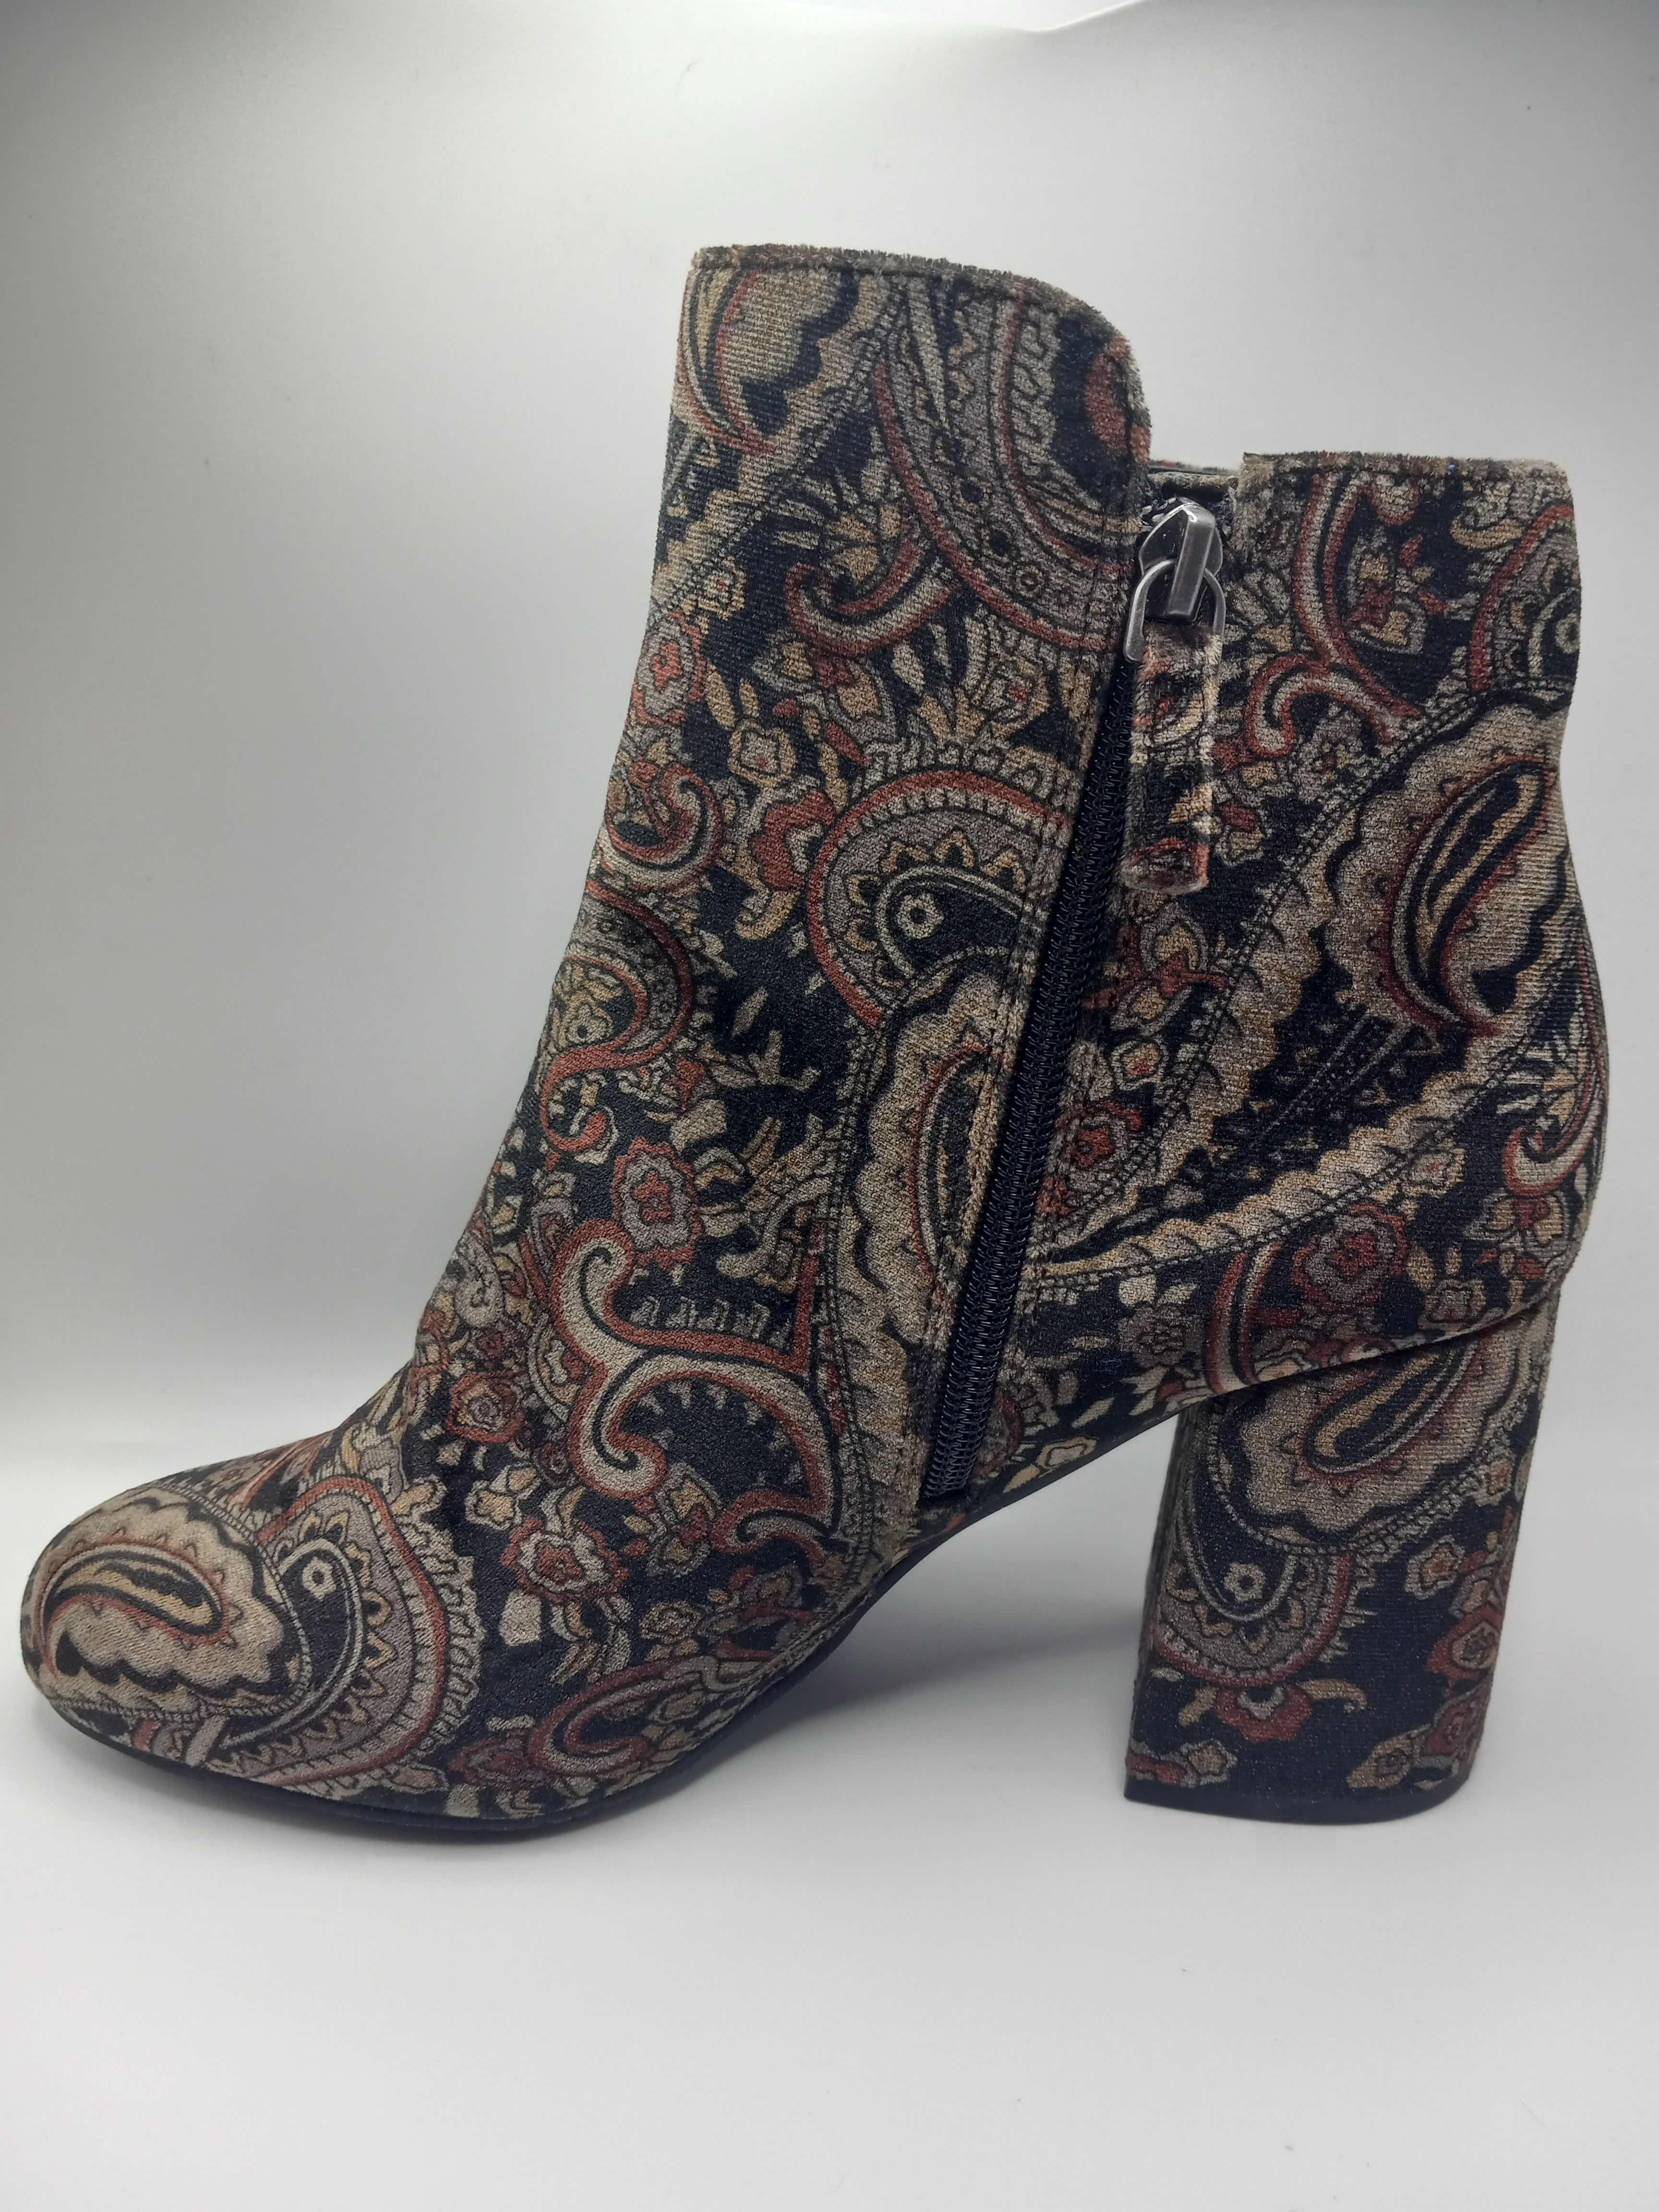 Photo 9 of BP KOLO PAISLEY VELVET FLATED BLOCK HEAL ANKLE BOOTS BOOTIES WOMEN’S SIZE 8.5